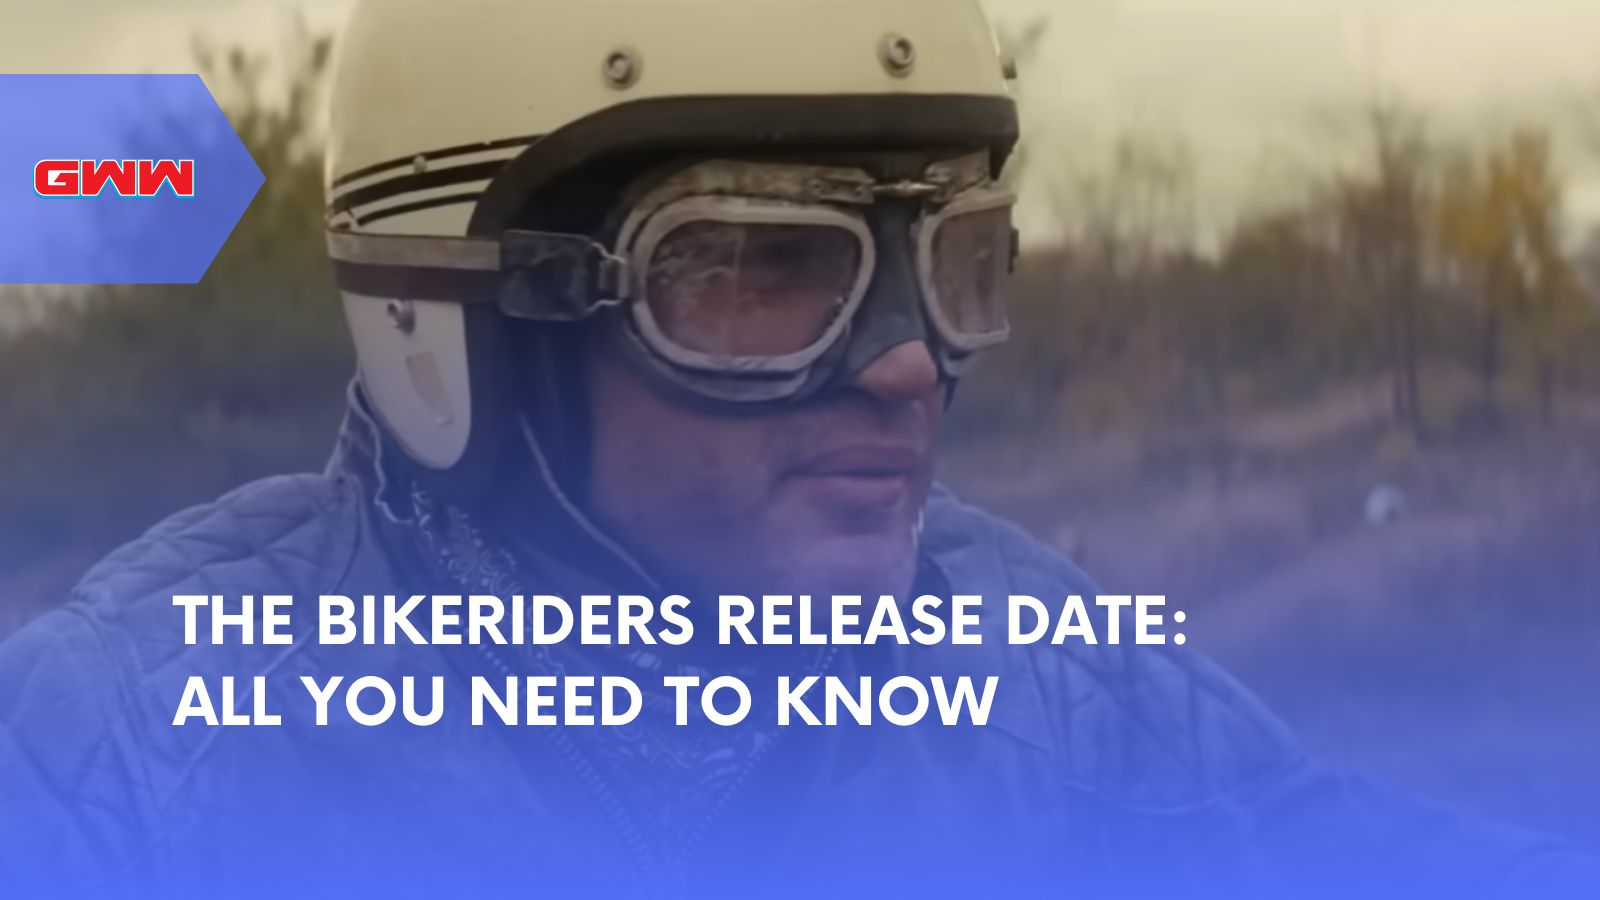 The Bikeriders Release Date: All You Need to Know